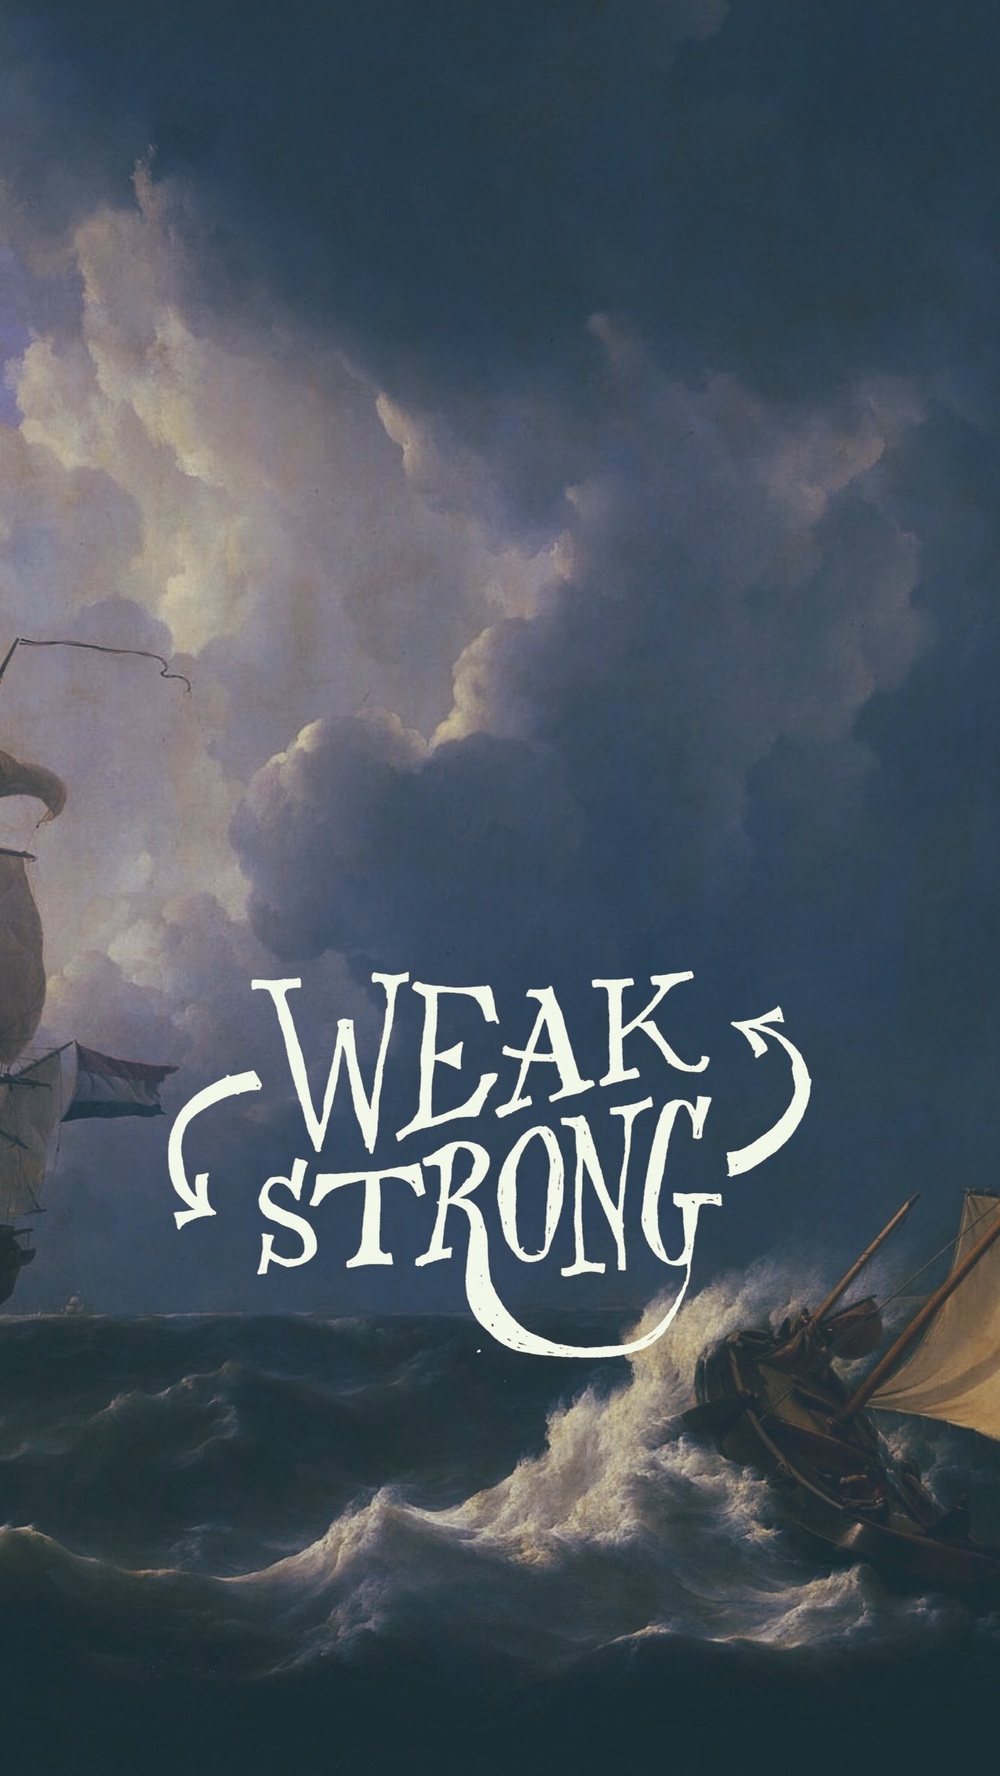 The Strong And Weak Phone Wallpaper Fred Sprinkle